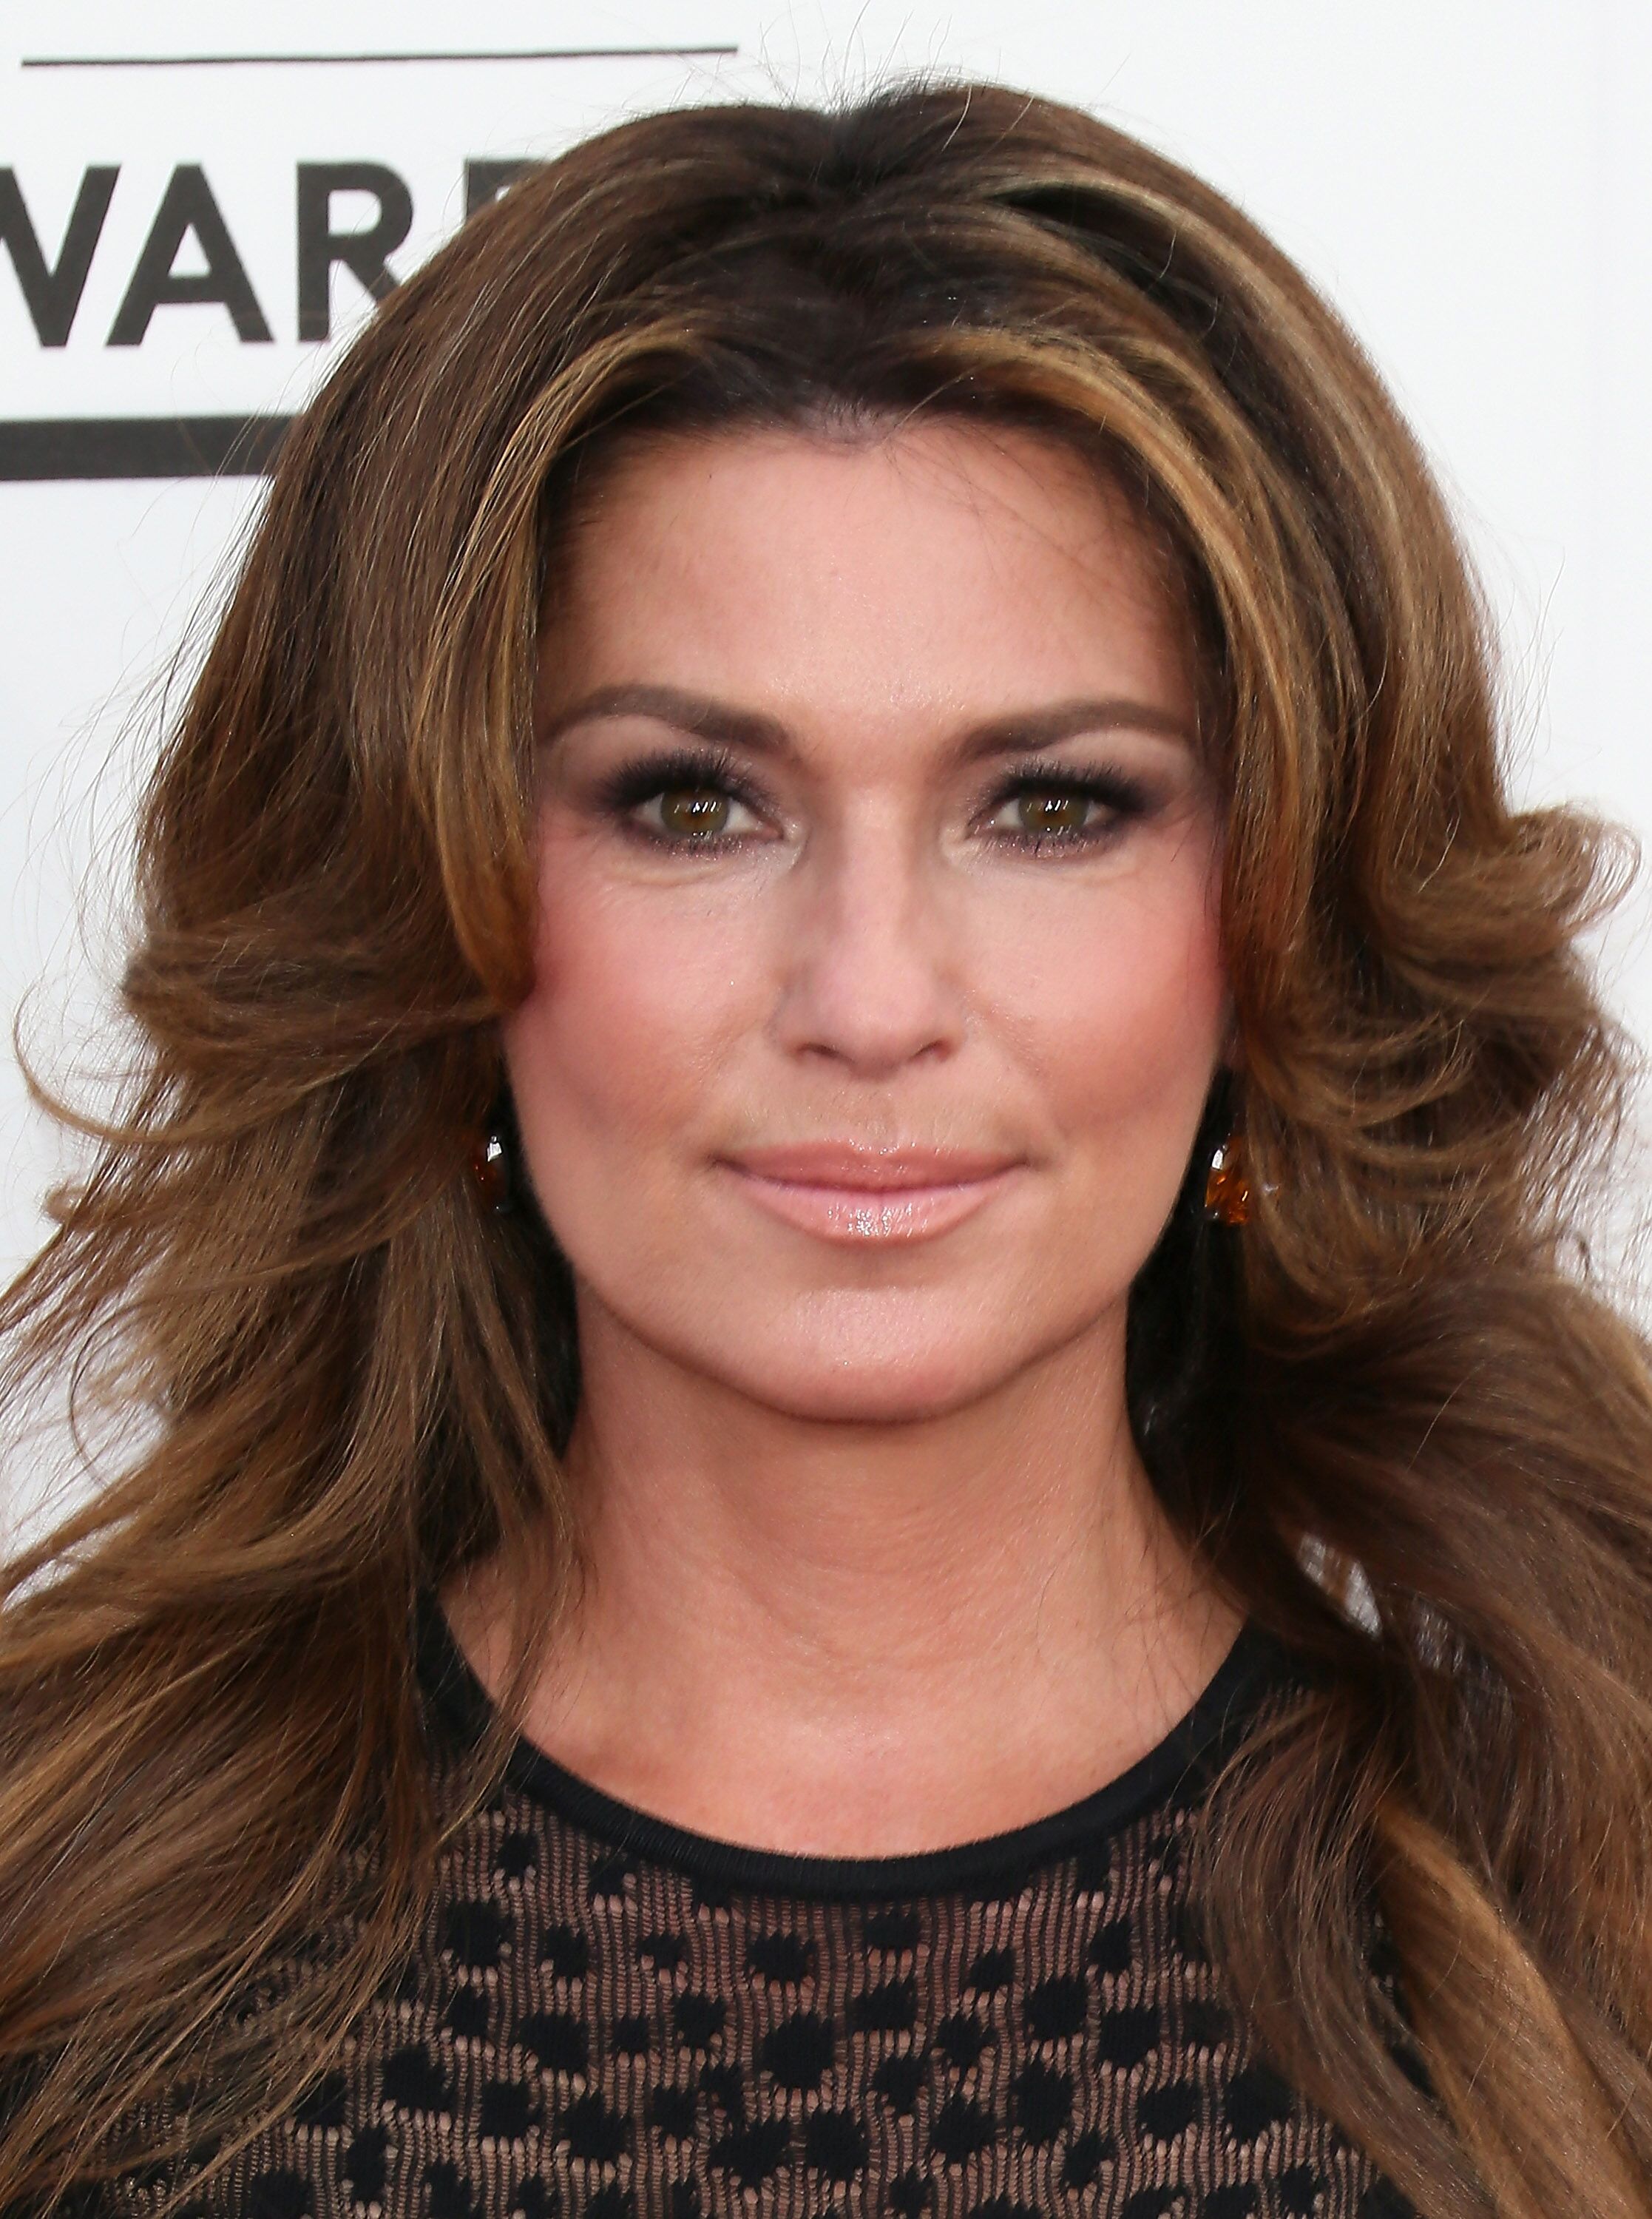 Shania Twain attends the 2014 Billboard Music Awards at the MGM Grand Garden Arena on May 18, 2014 in Las Vegas, Nevada | Photo: Getty Images